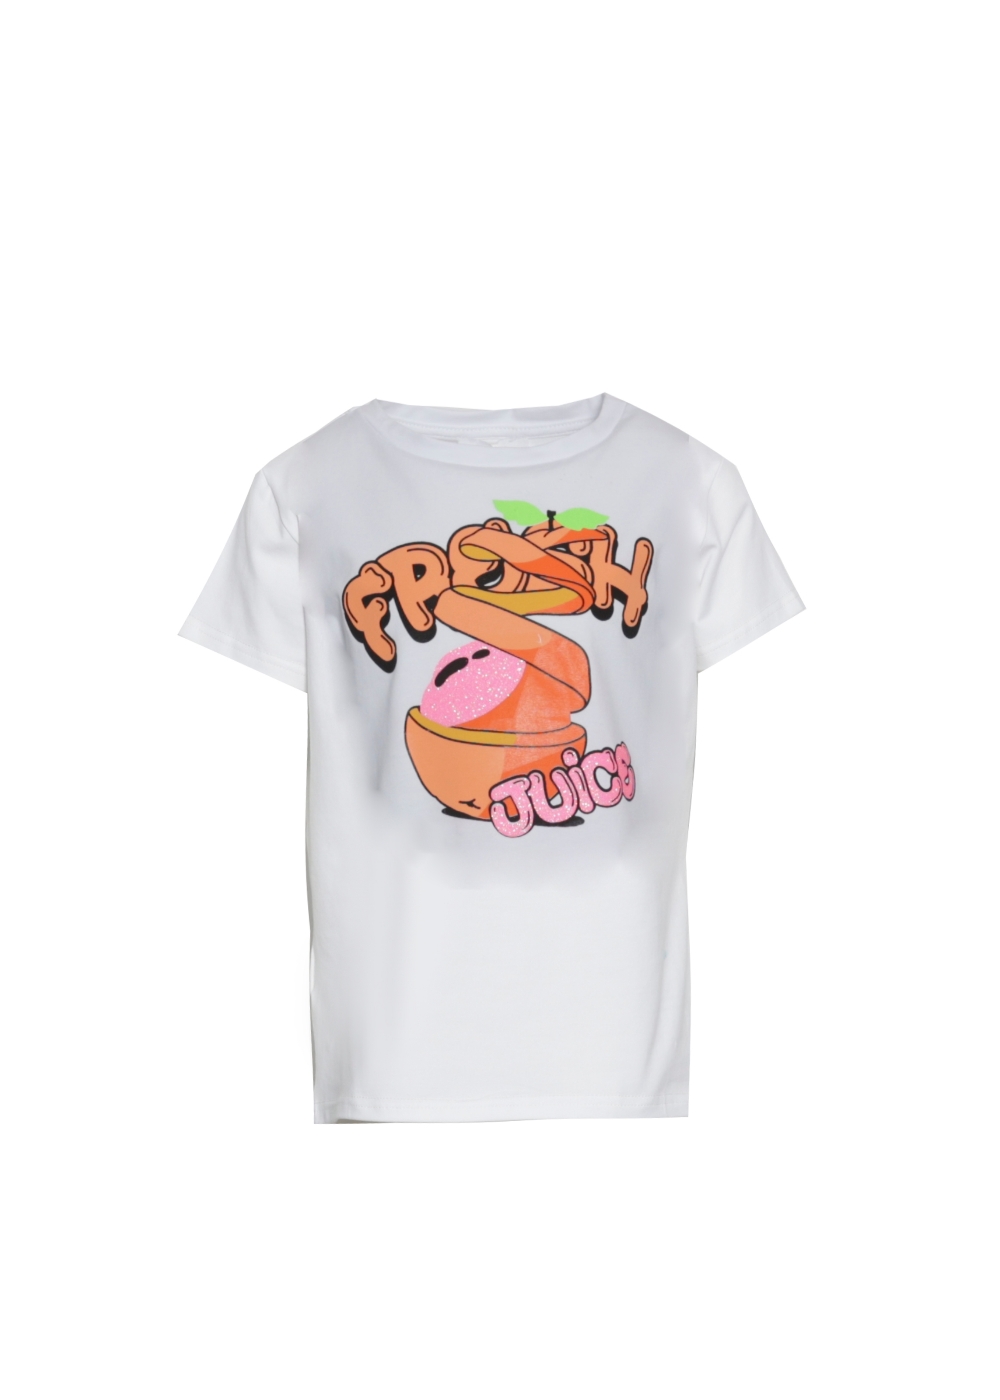 Featured image for “Fun & Fun T-shirt con stampa”